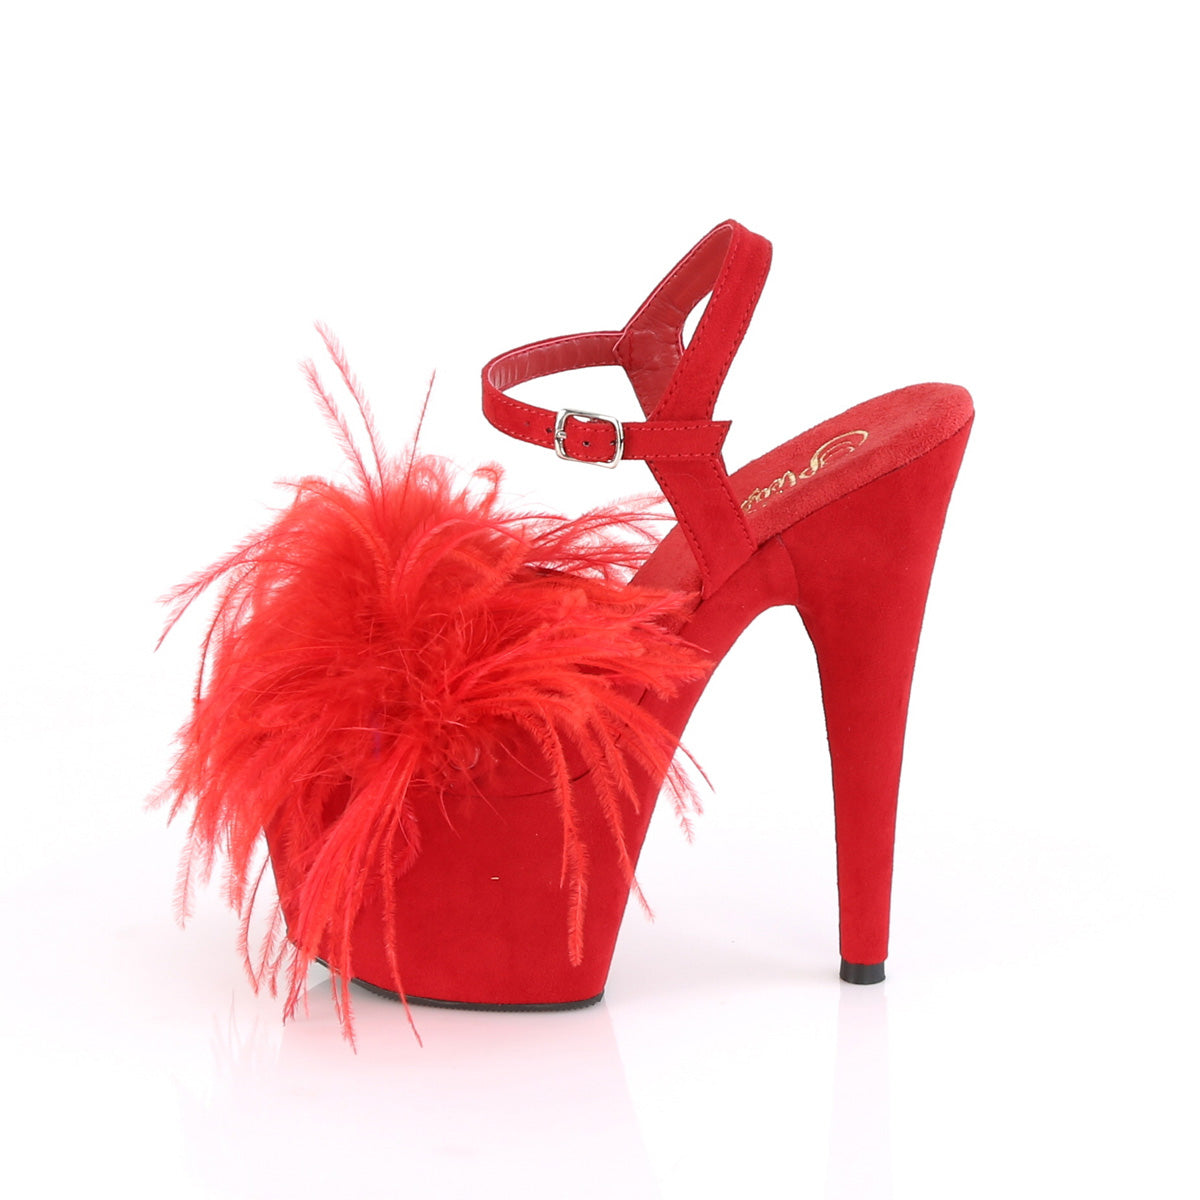 Pleaser Womens Sandals ADORE-709F Red Faux Suede-Feather/Red Faux Suede